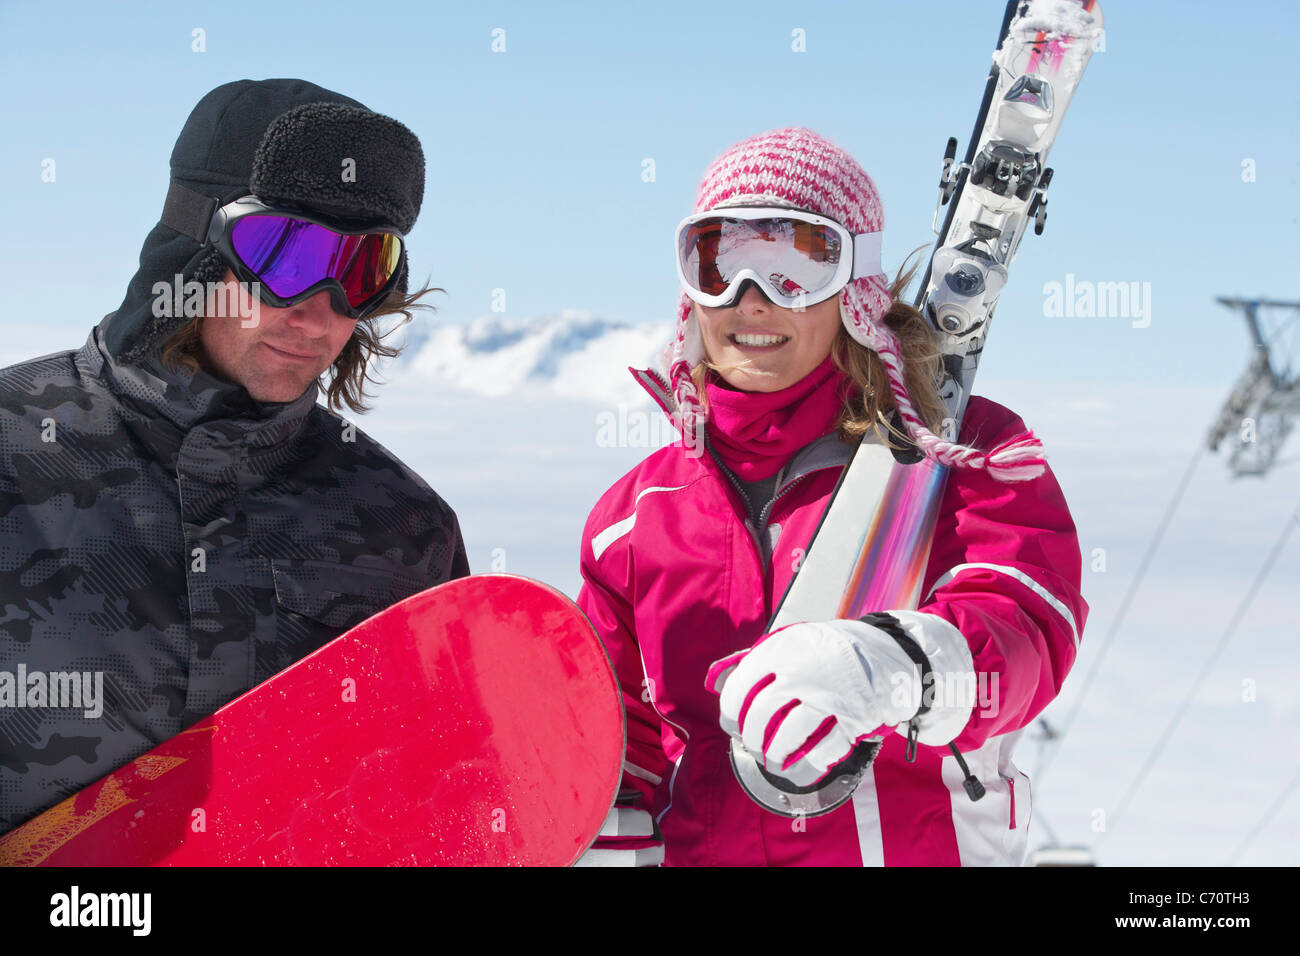 Skiers carrying equipment outdoors Stock Photo